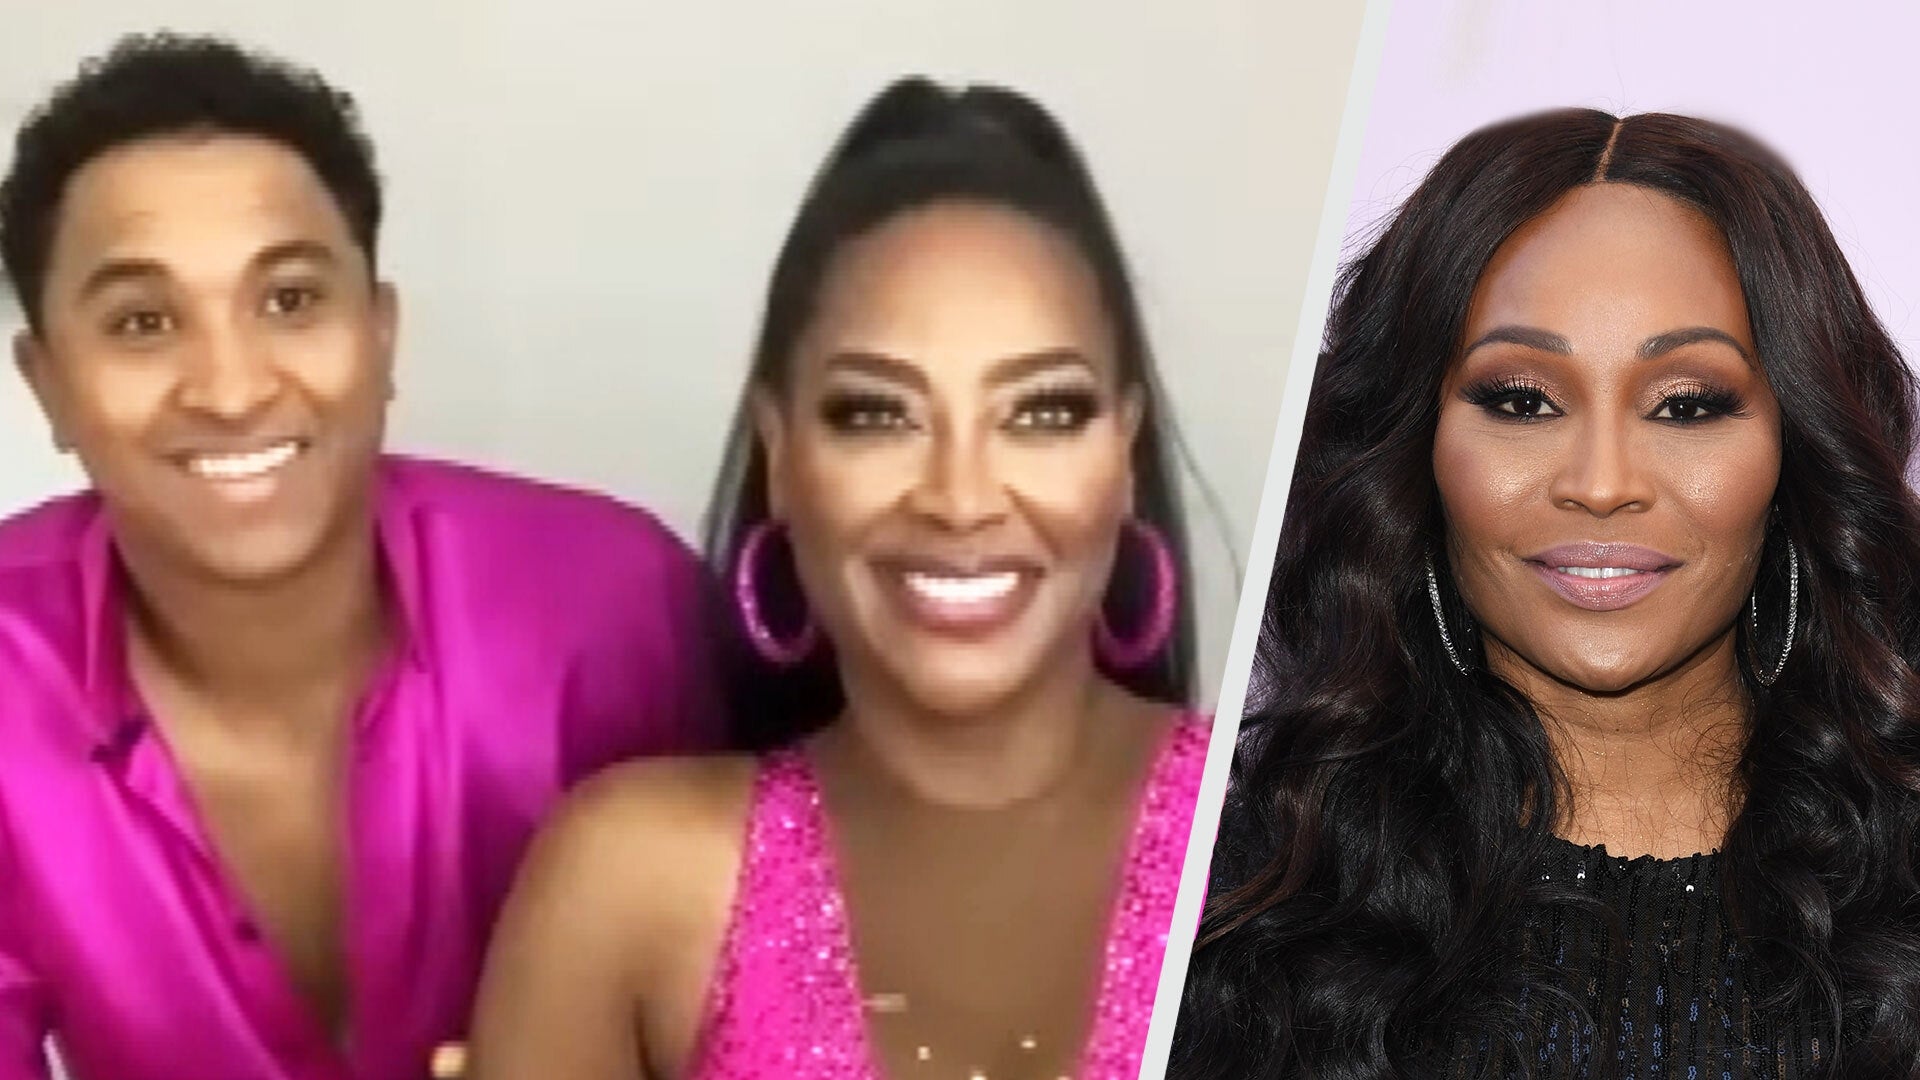 Dancing With the Stars Kenya Moore on Cynthia Bailey Leaving The Real Housewives of Atlanta image